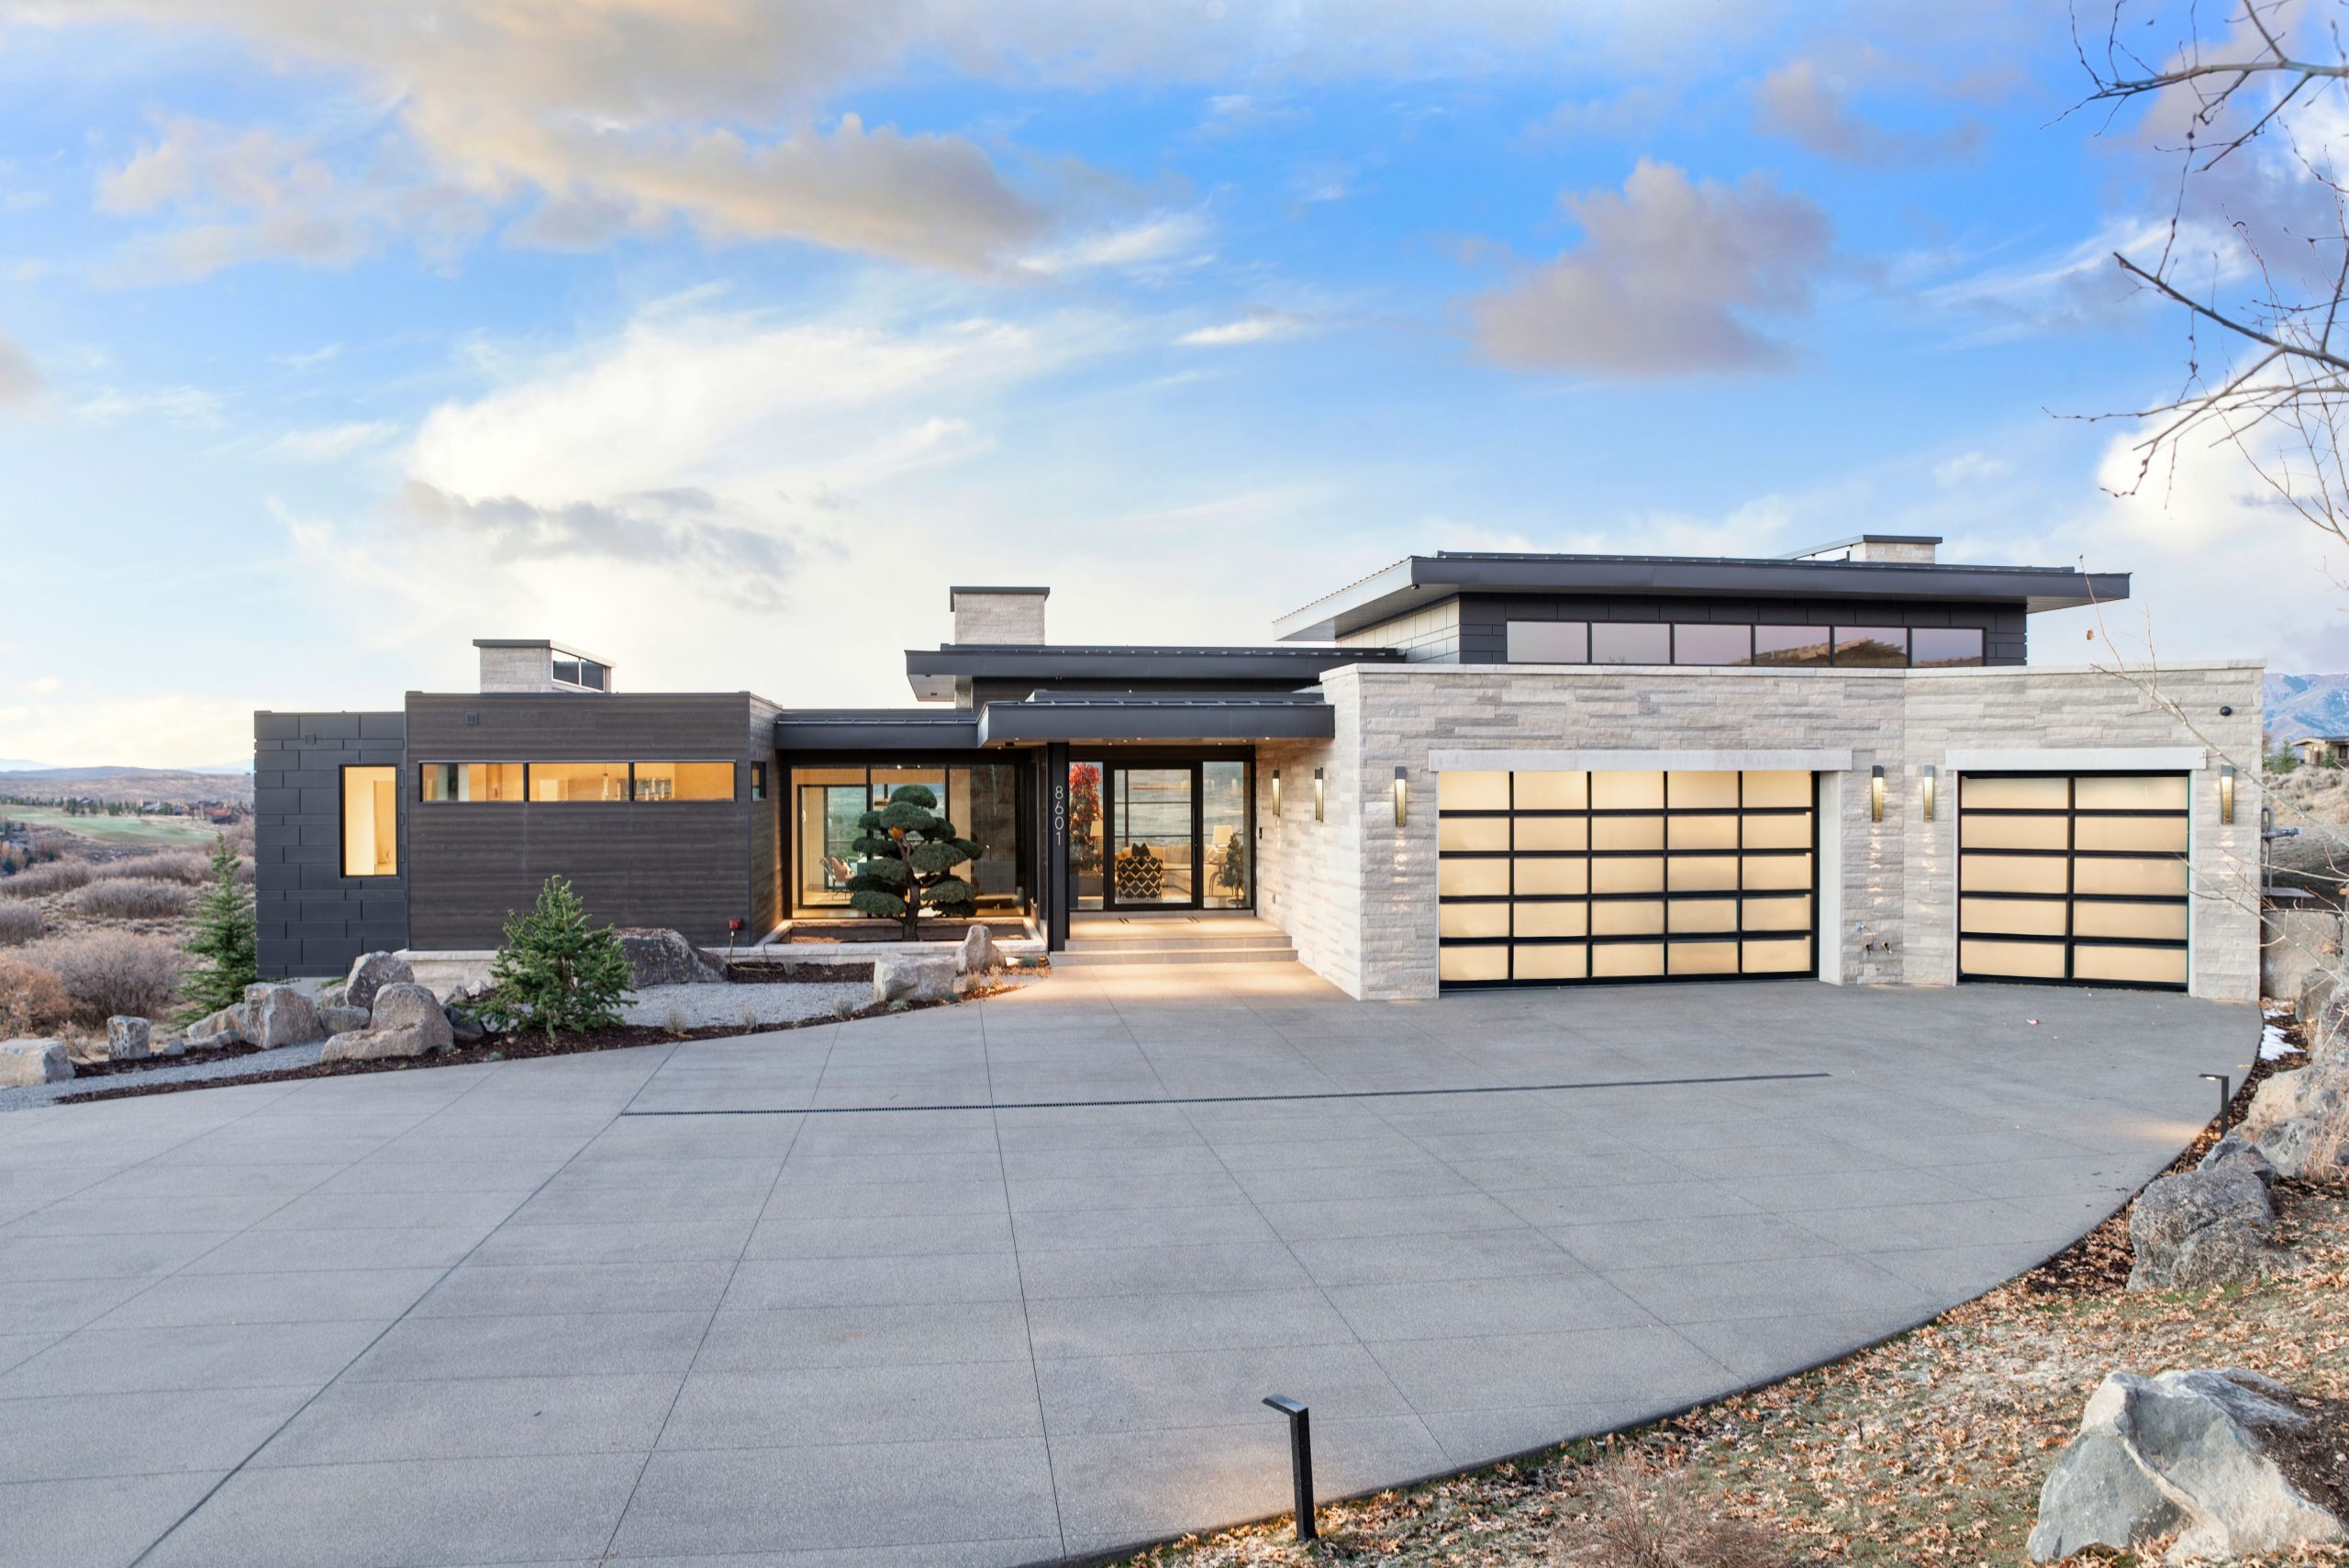 Our custom contemporary homes offer the highest return on value and craftmanship in the custom home building industry.